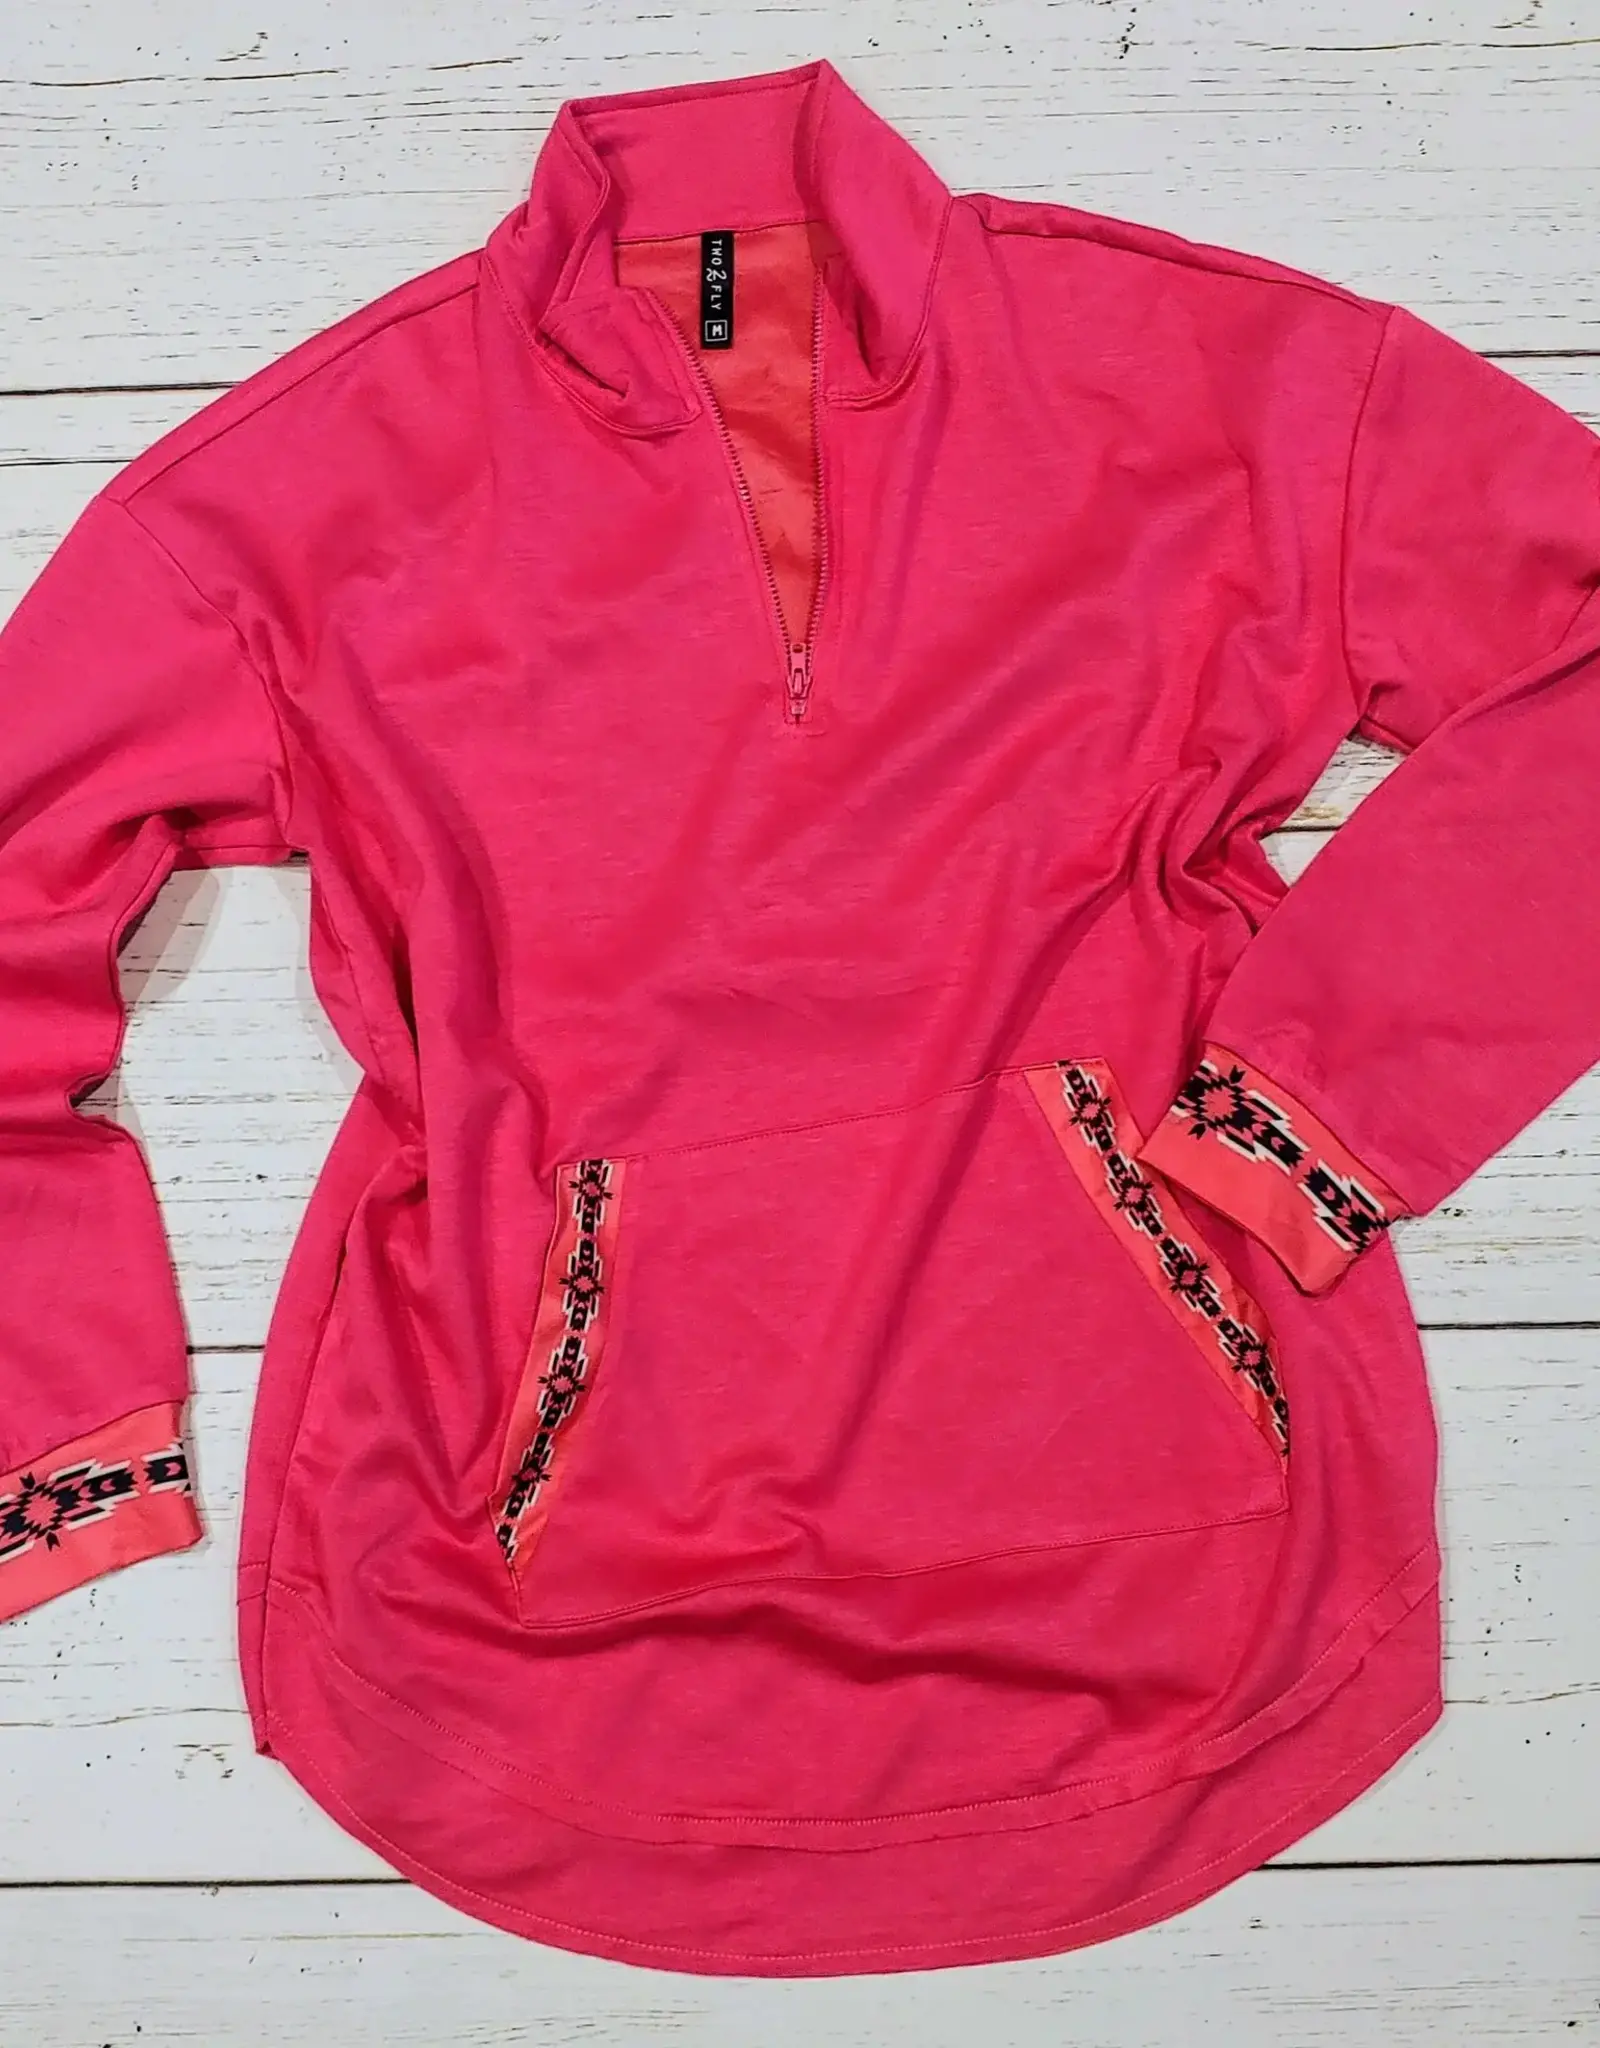 TWO2FLY PULLOVER WMS 1/4 ZIP "TOTALLY DOLLY" PINK